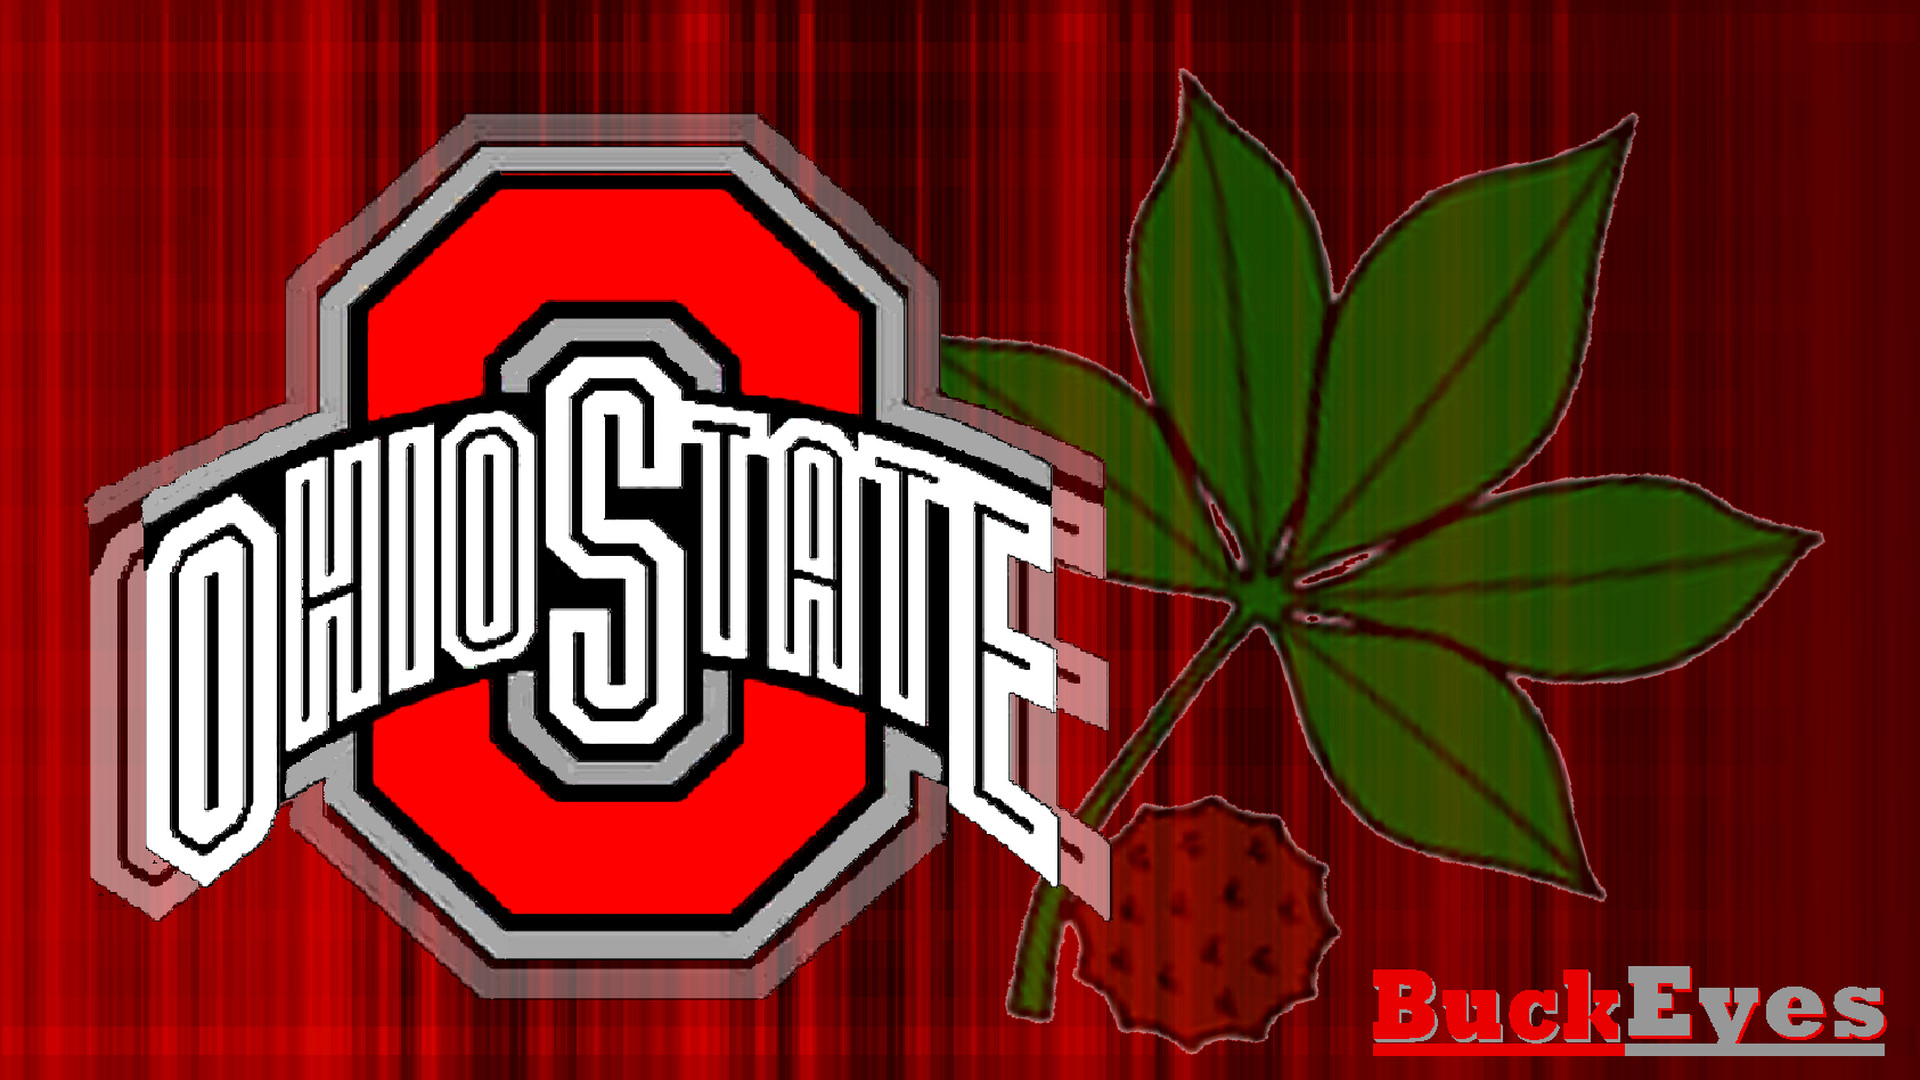 1920x1080 Ohio State Buckeyes images RED BLOCK O WHITE OHIO STATE WITH BUCKEYE LEAF  HD wallpaper and background photos